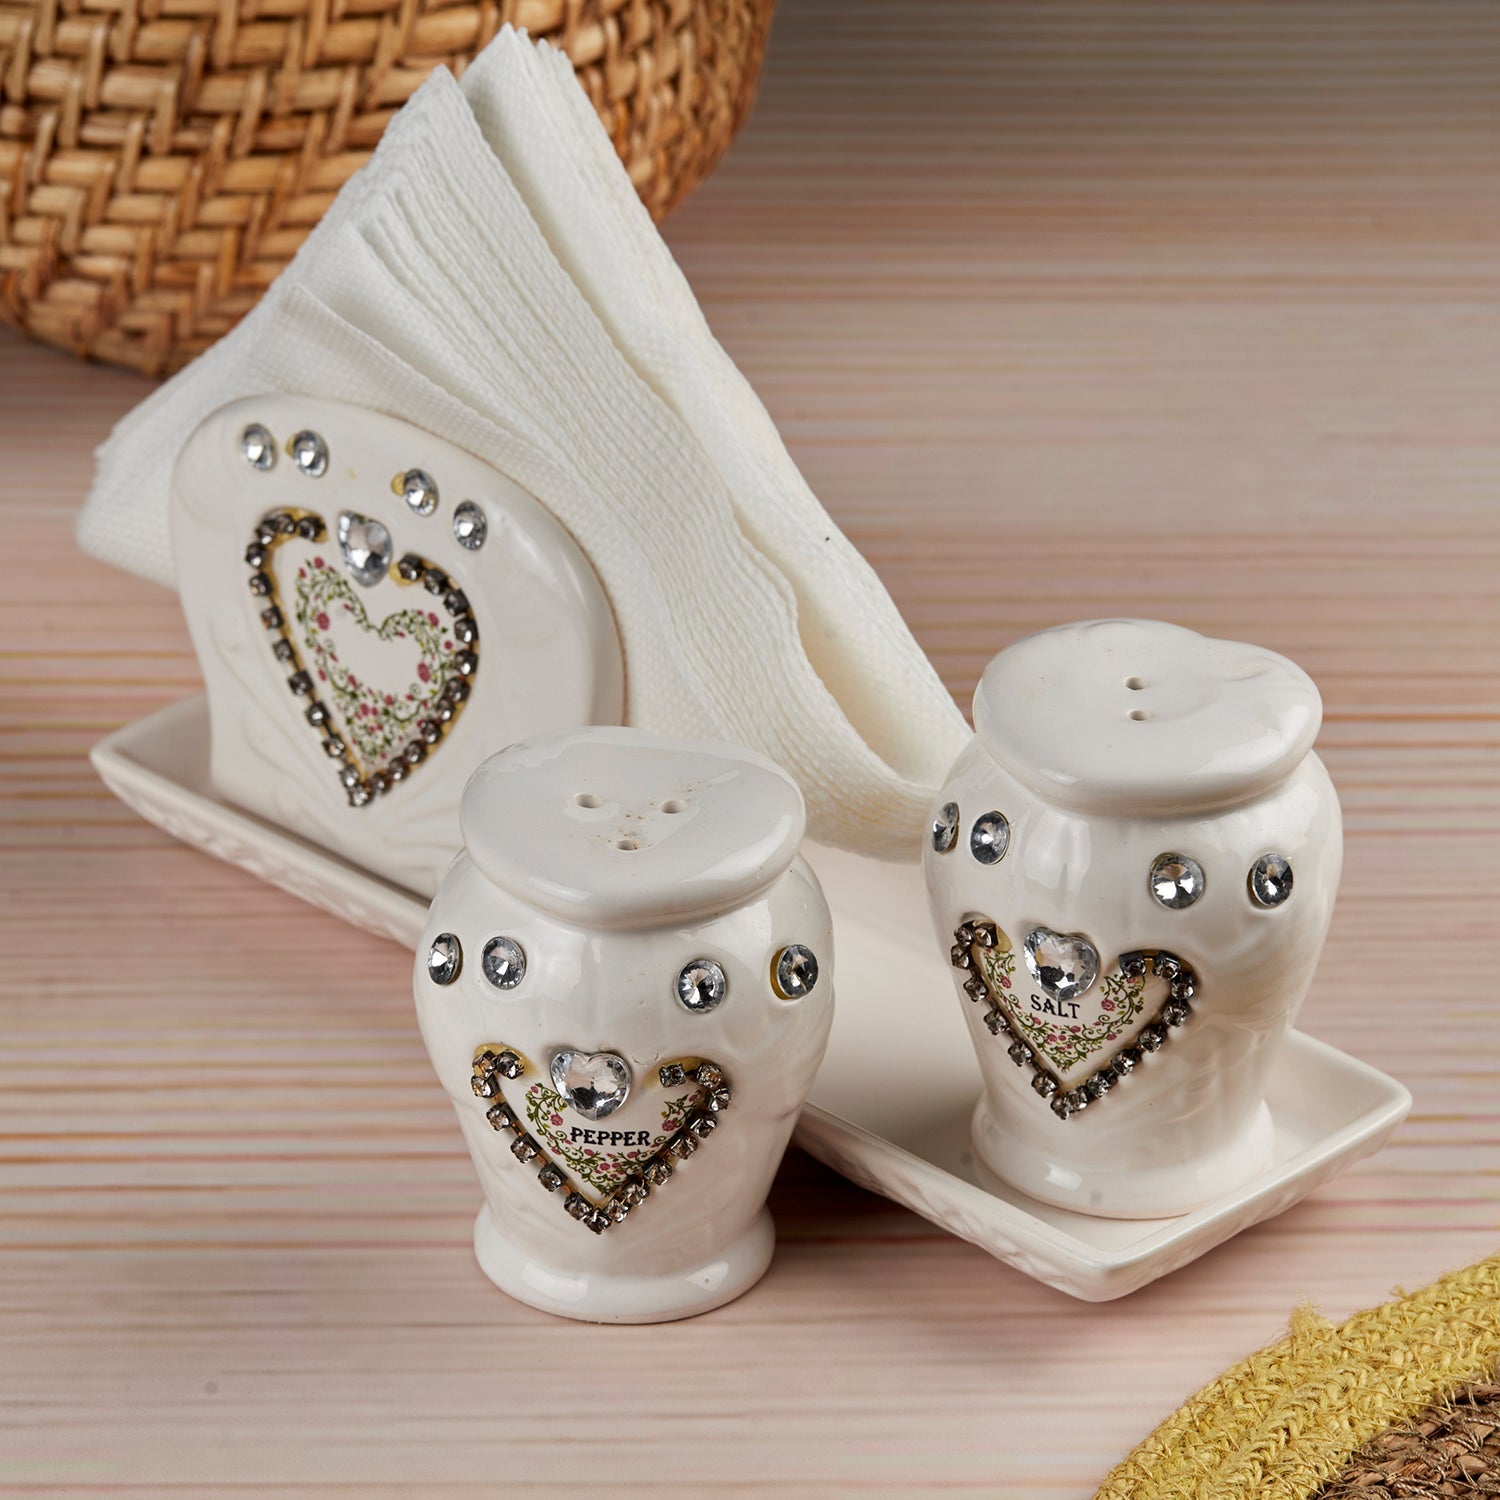 Ceramic Salt and Pepper Shakers Set with tray for Dining Table (10710)